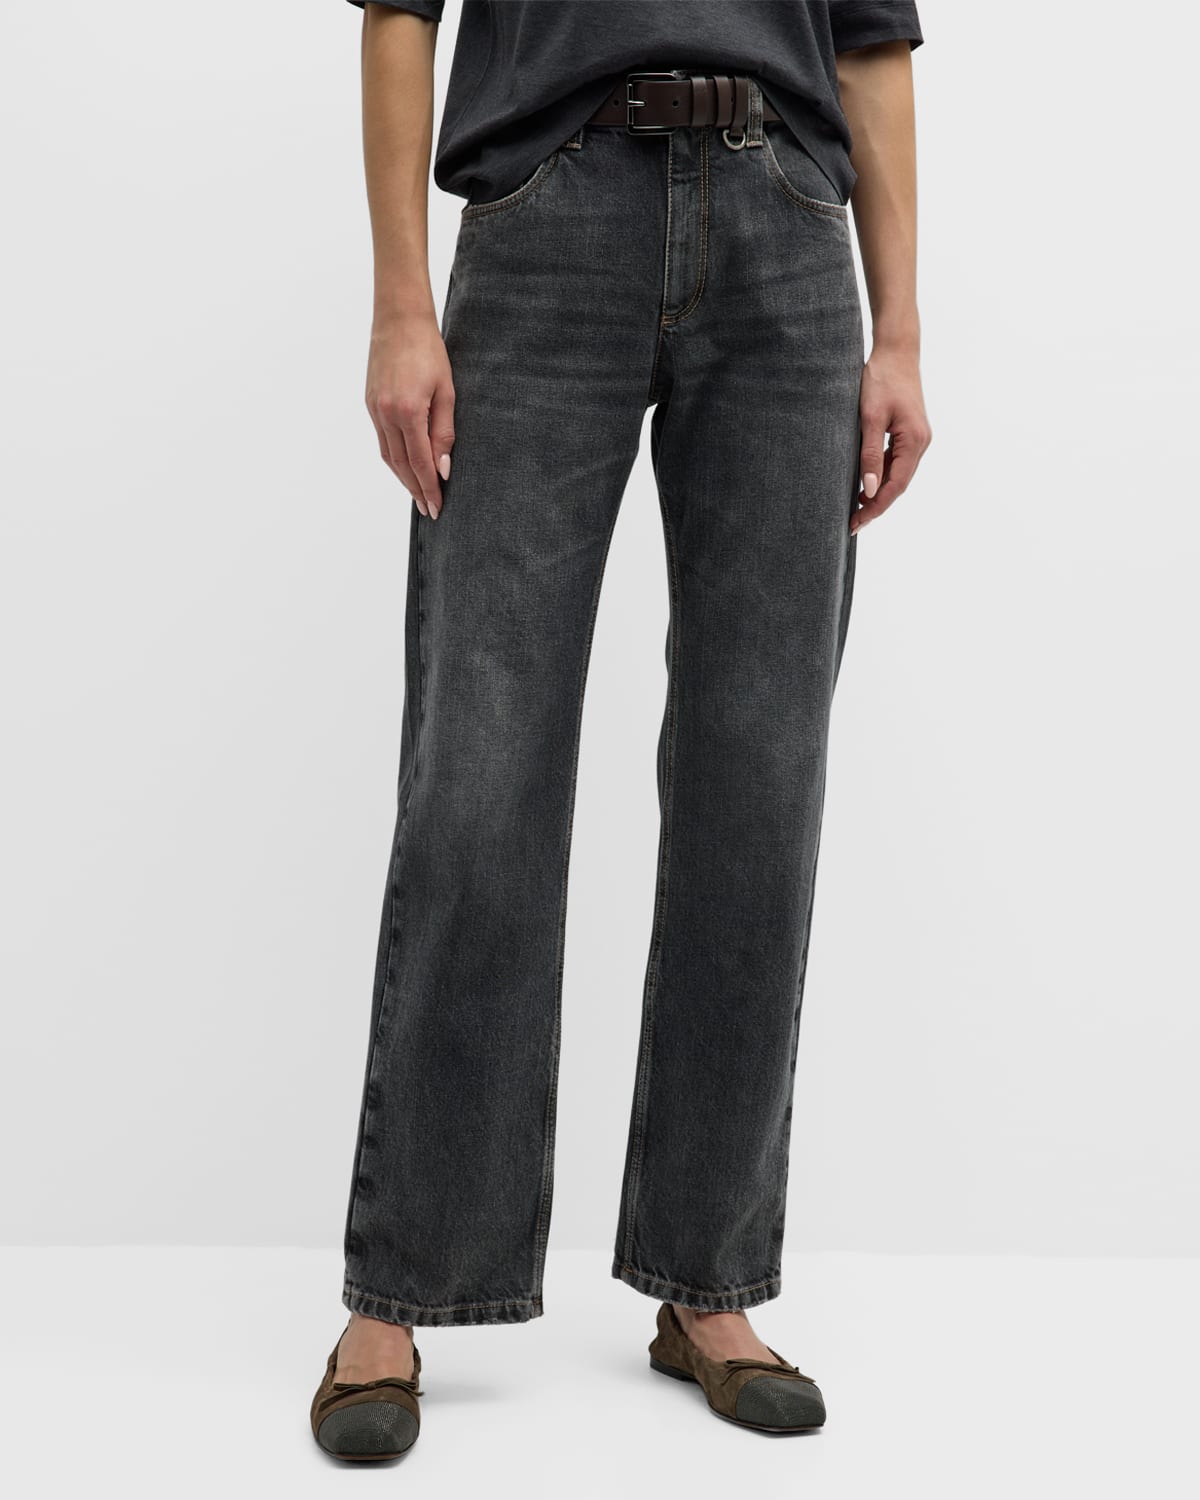 Retro Vintage Relaxed Jeans